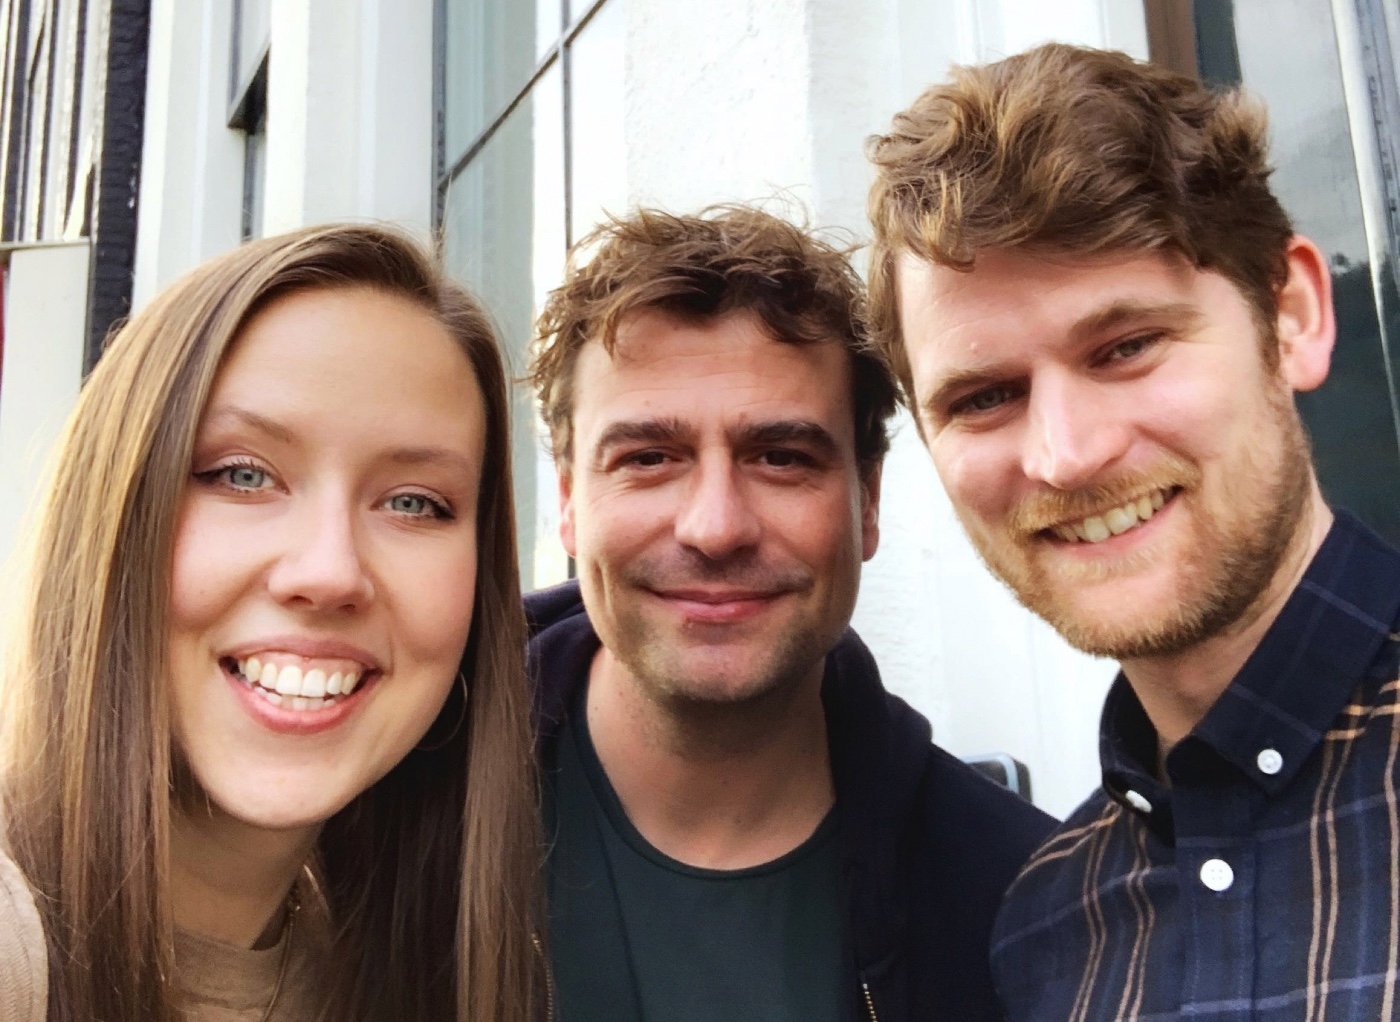 From left to right: Framer’s newest team members, Kait Creamer, Lennart Paasse, and Ed Mortlock.